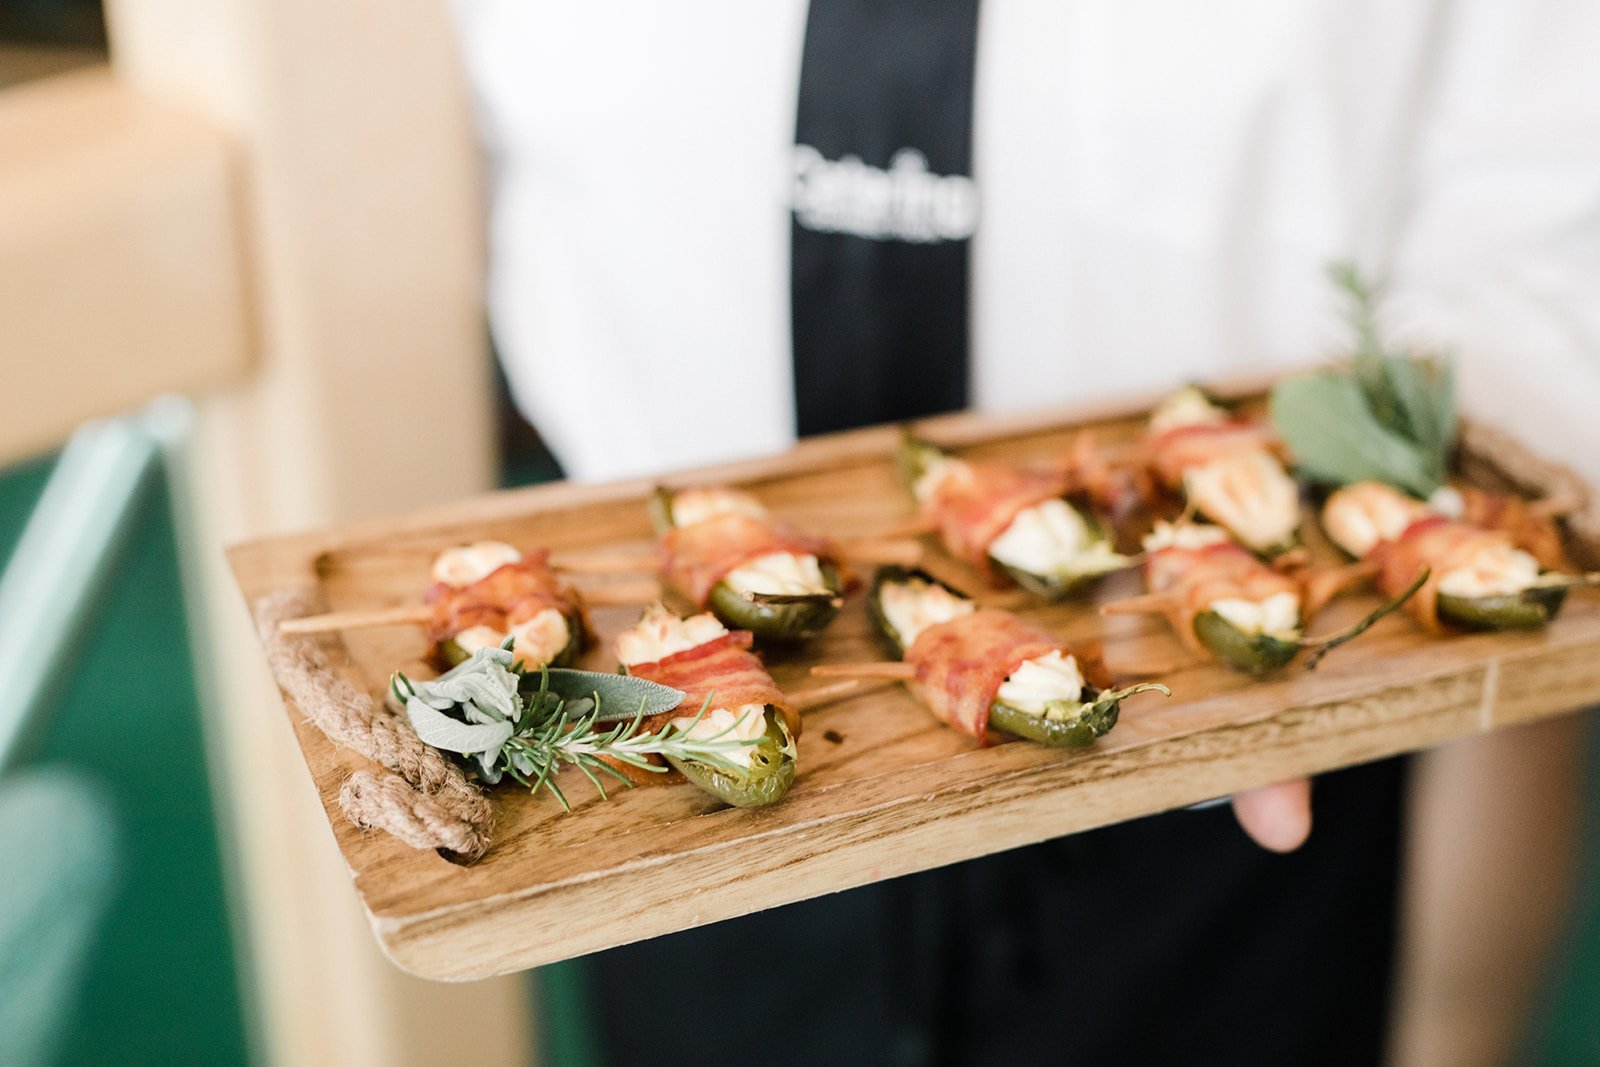 www.santabarbarawedding.com | Anna Delores Photography | Channel Cat Charters | Onyx + Redwood | Catering Connection | Bacon Wrapped Jalapeno Poppers Served by Waiter